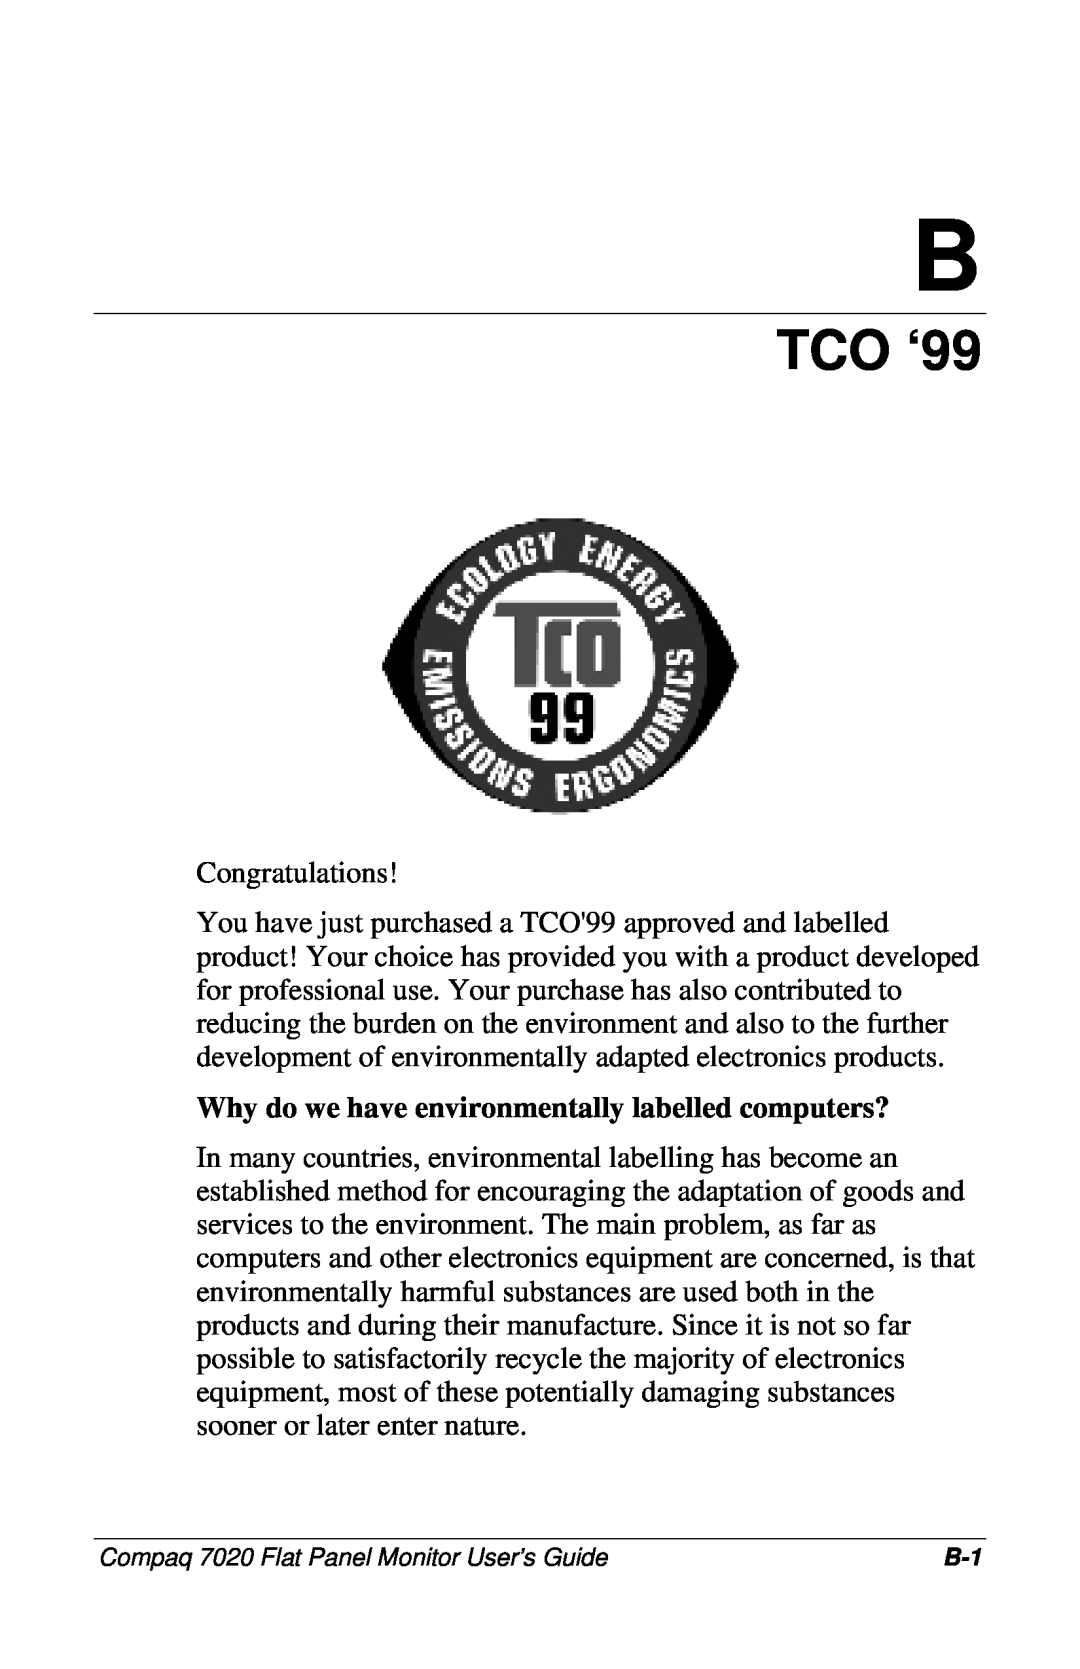 Compaq 7020 manual TCO ‘99, Why do we have environmentally labelled computers? 